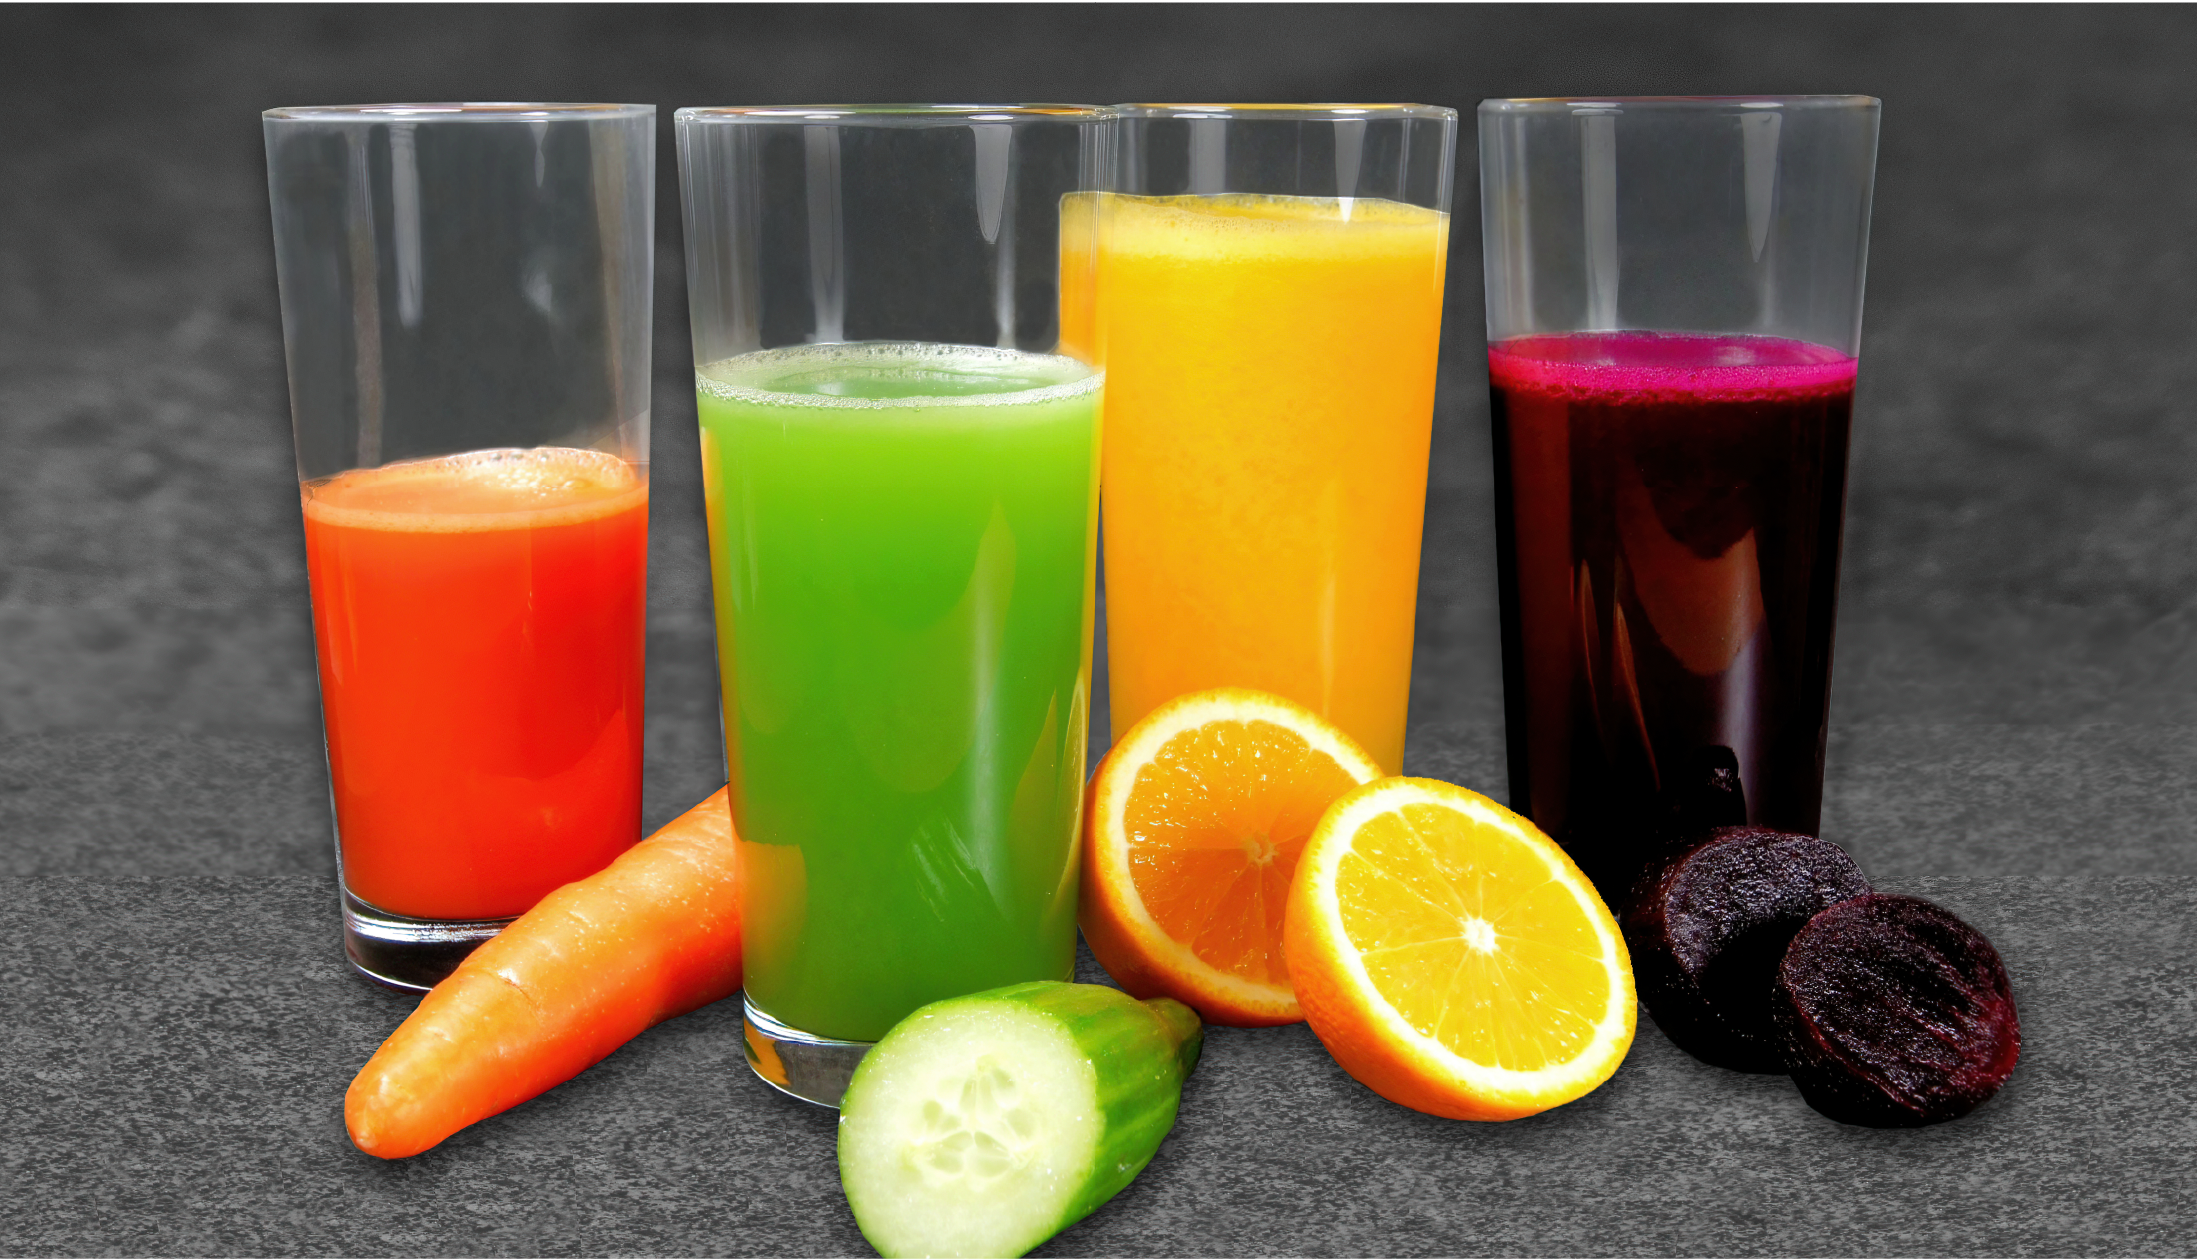 FRESHLY SQUEEZED JUICES